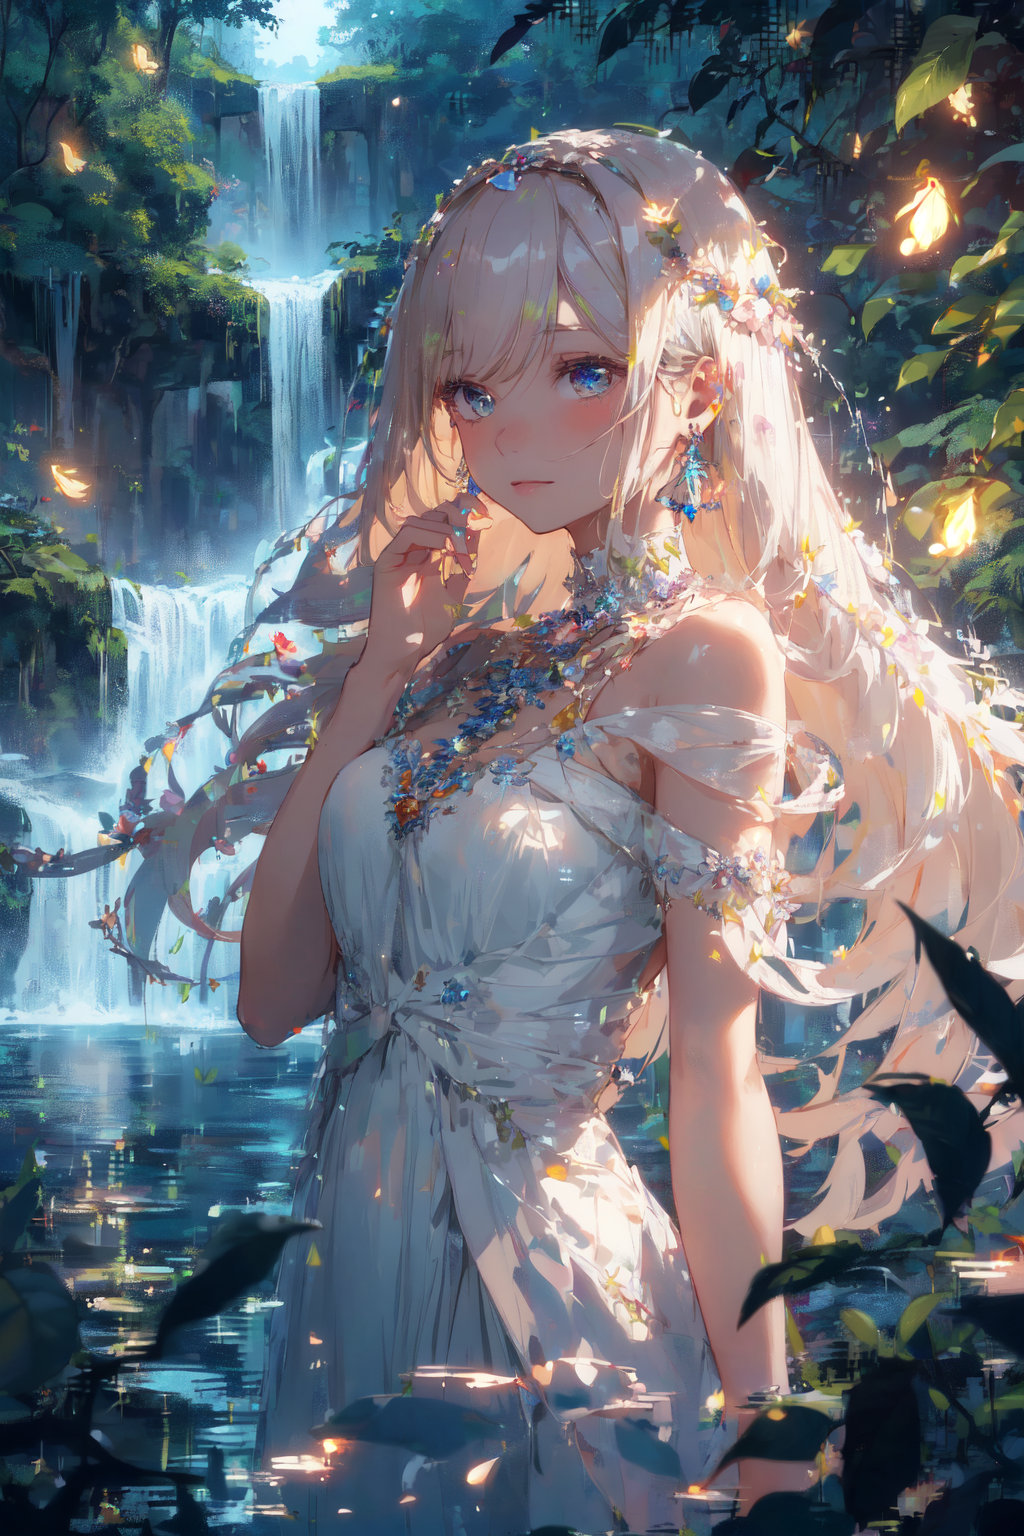 Captivating Serene Anime Girl Amidst Lush Forest And Lake Of Beautiful  Water Lilies